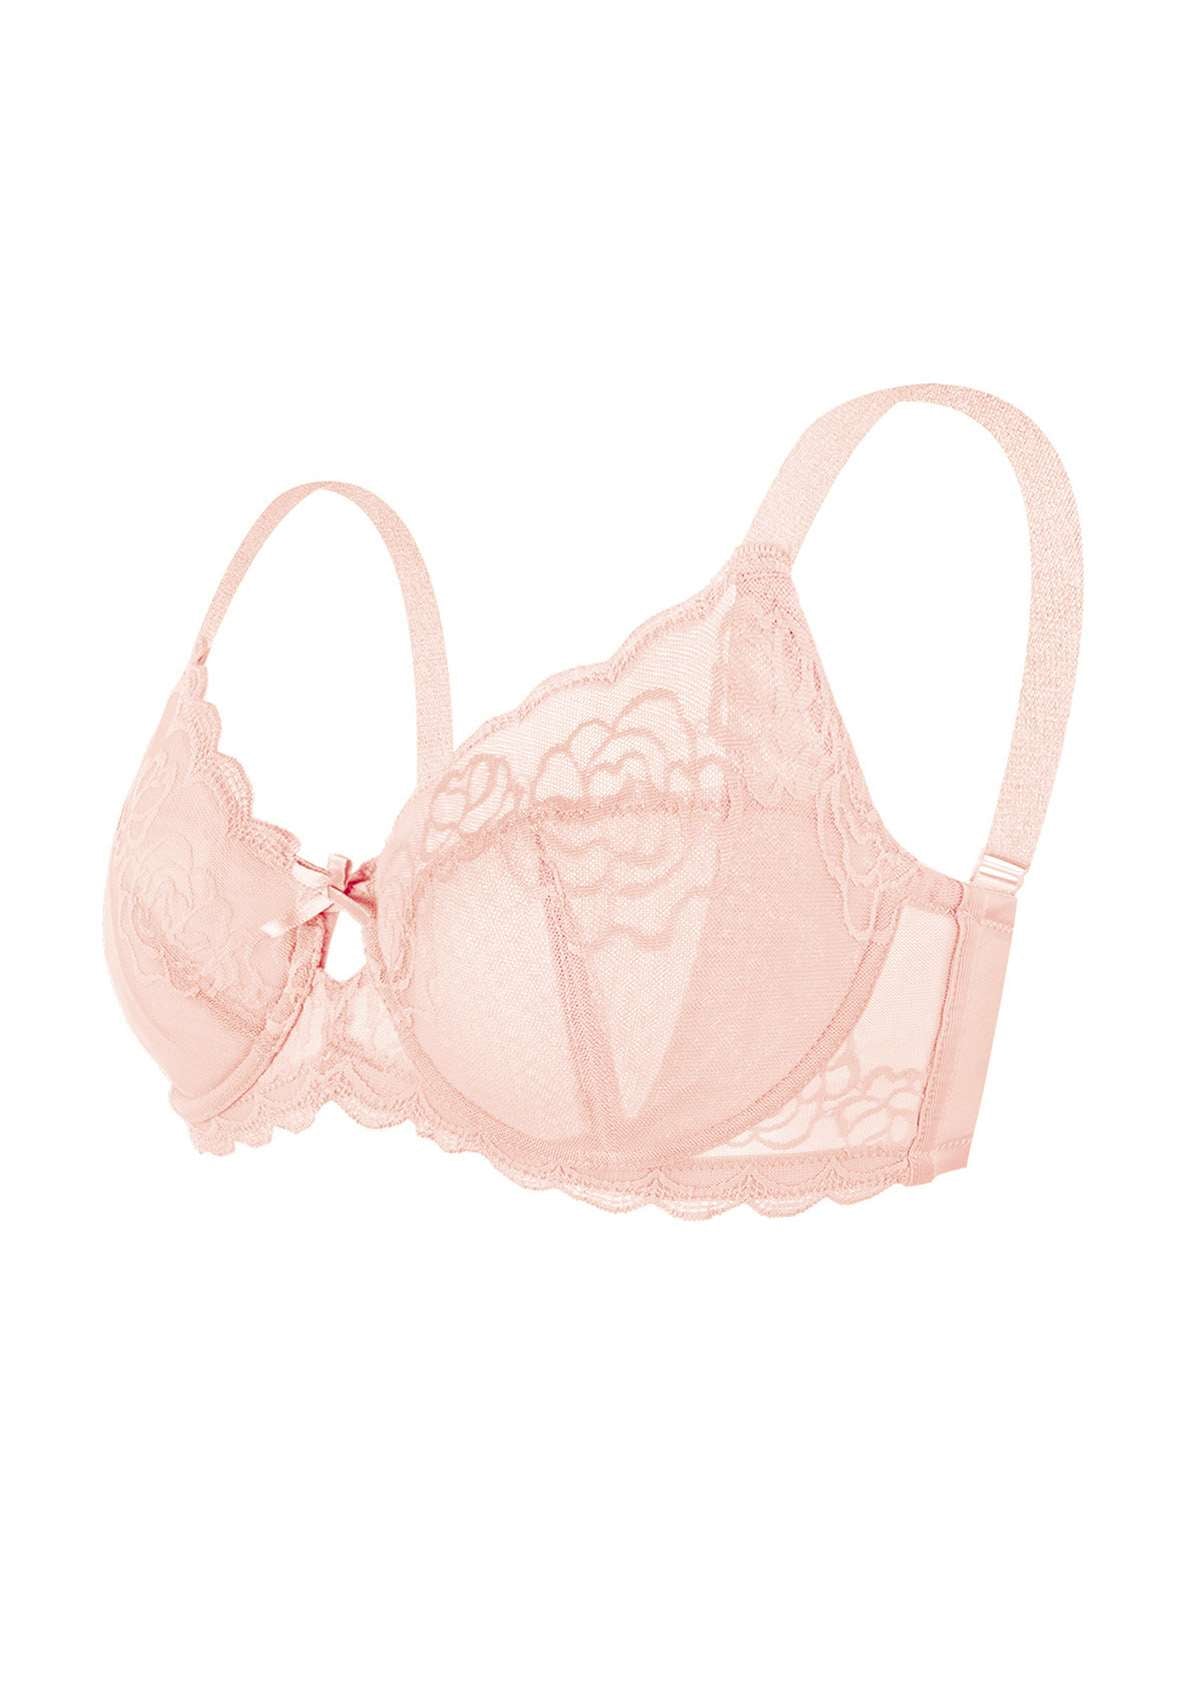 HSIA Rosa Bonica Sheer Lace Mesh Unlined Thin Comfy Woman Bra - Pink / 38 / DDD/F